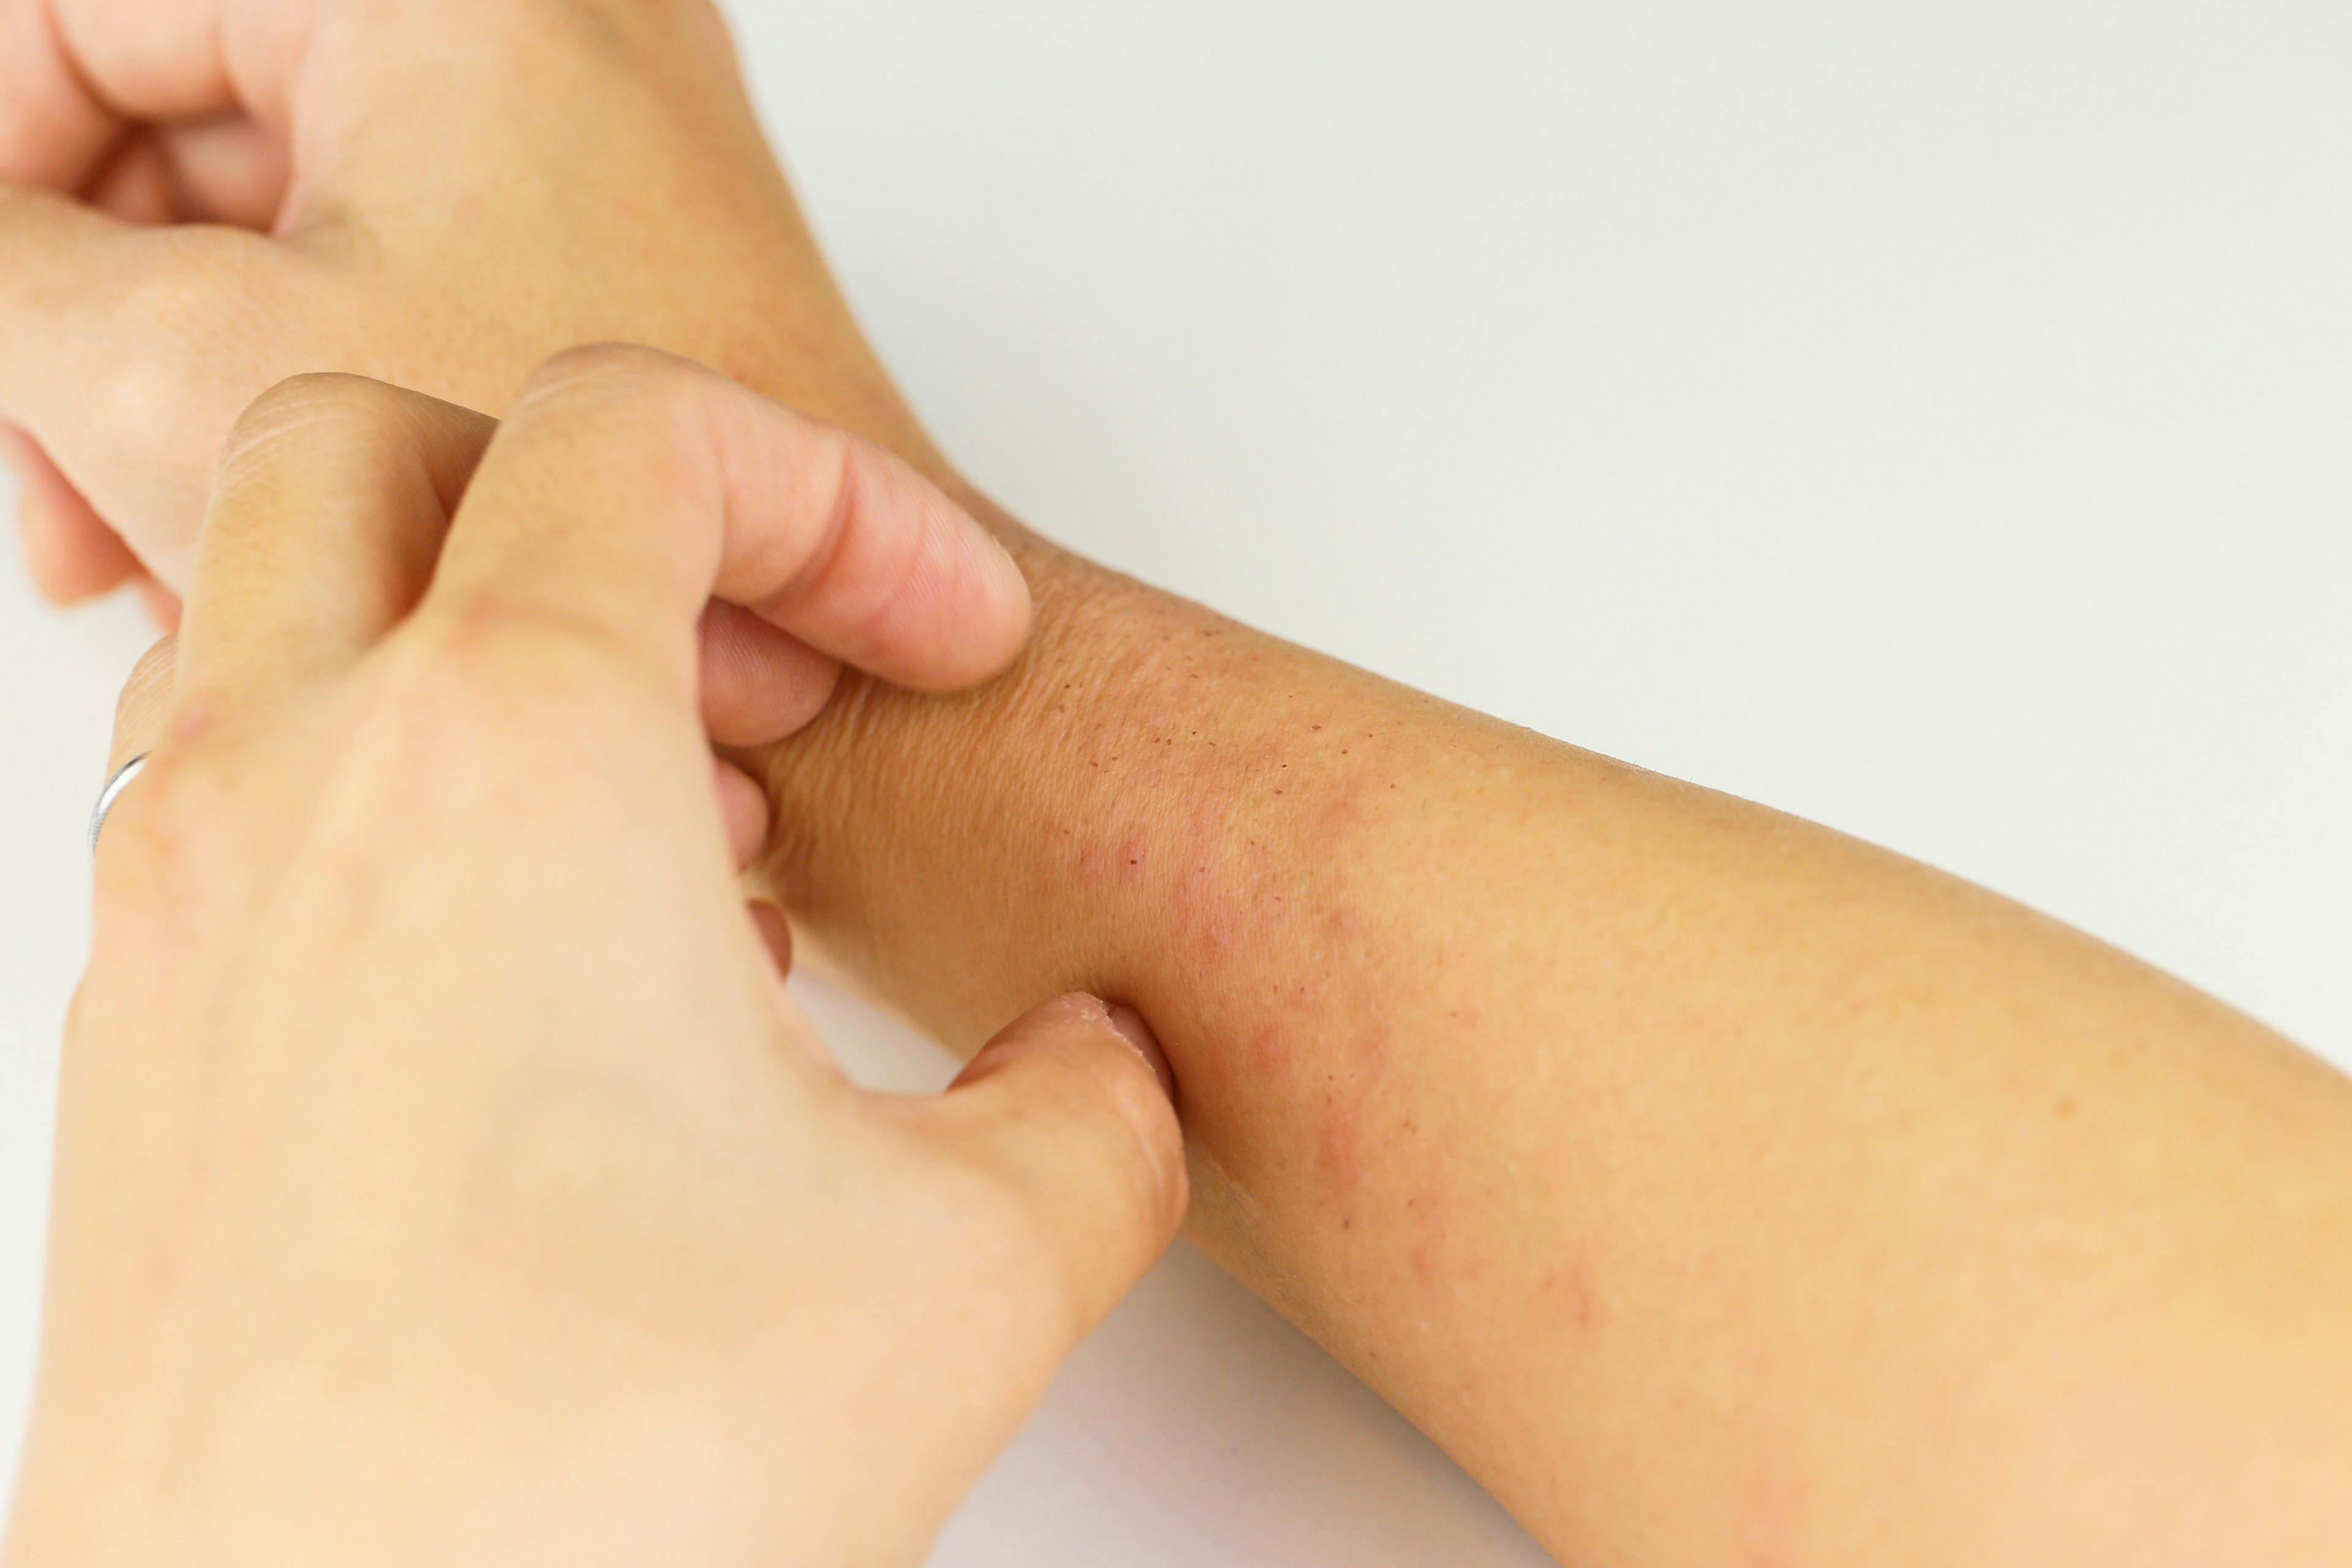 Inflammation-associated itching perceived as more intense